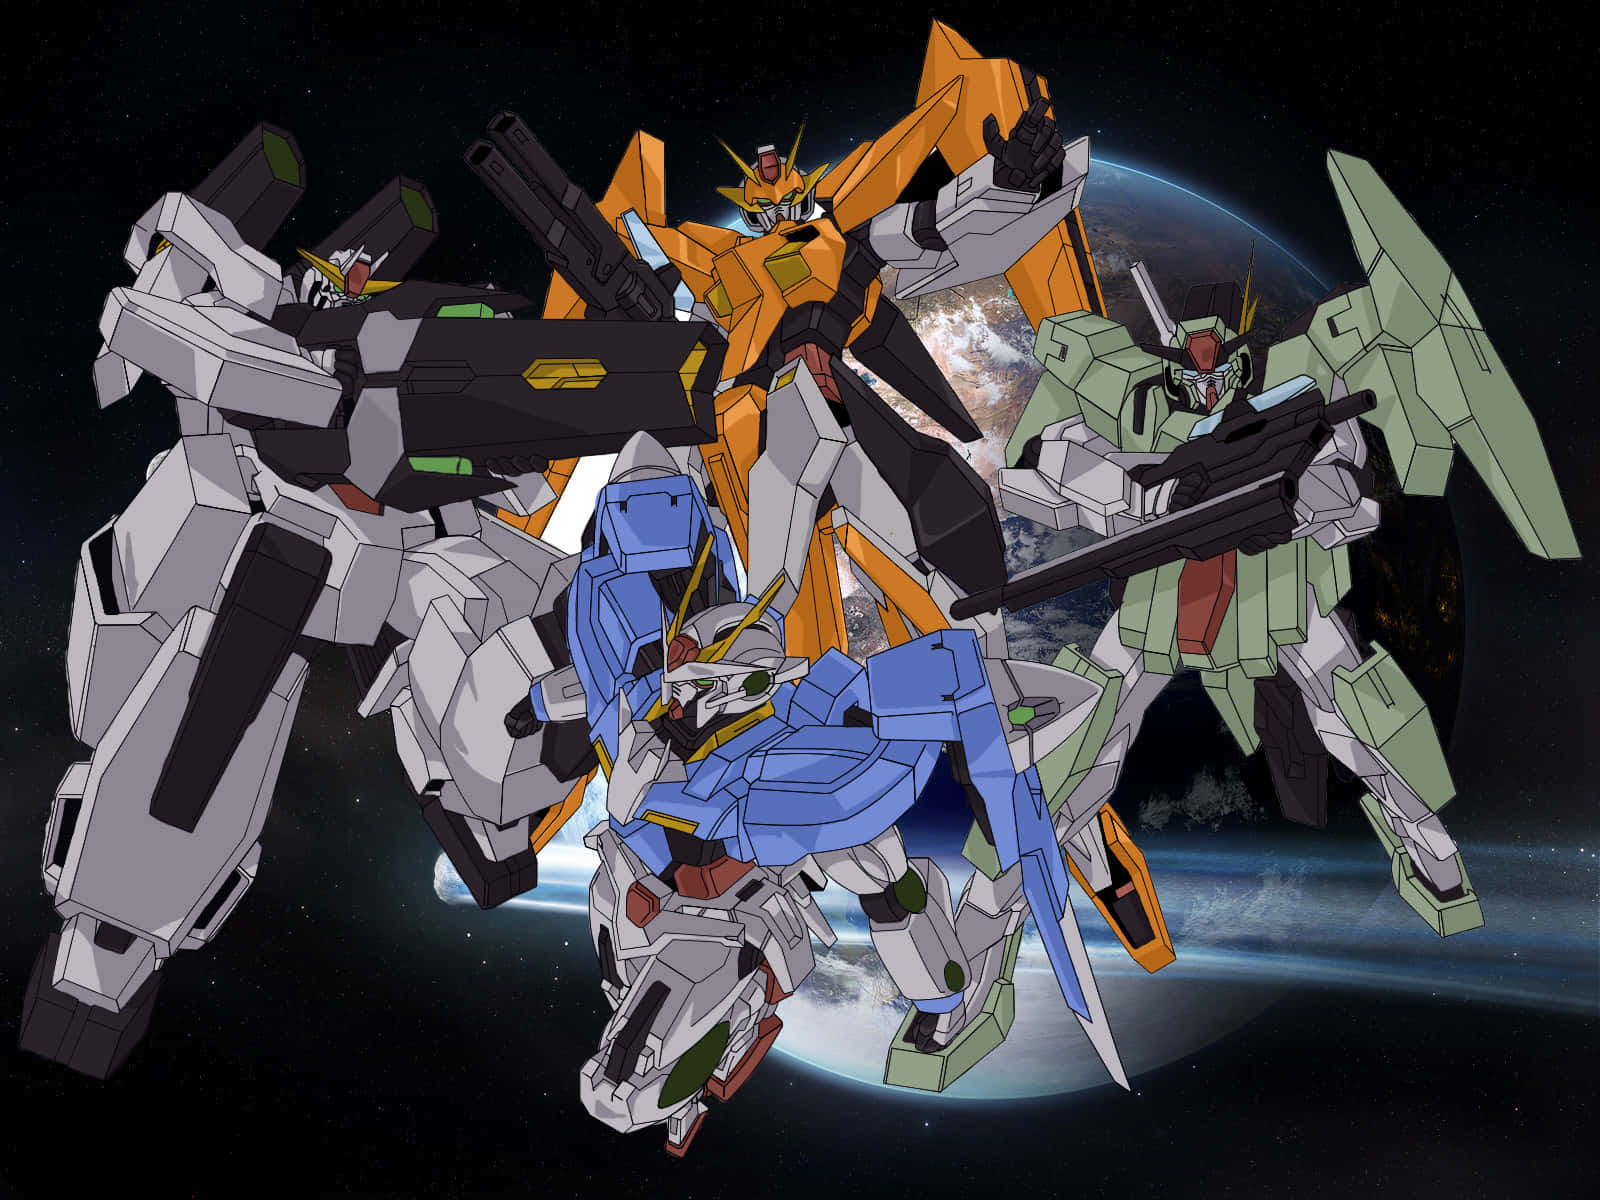 War ready - Experience the thrill of battle with this gorgeous Gundam image